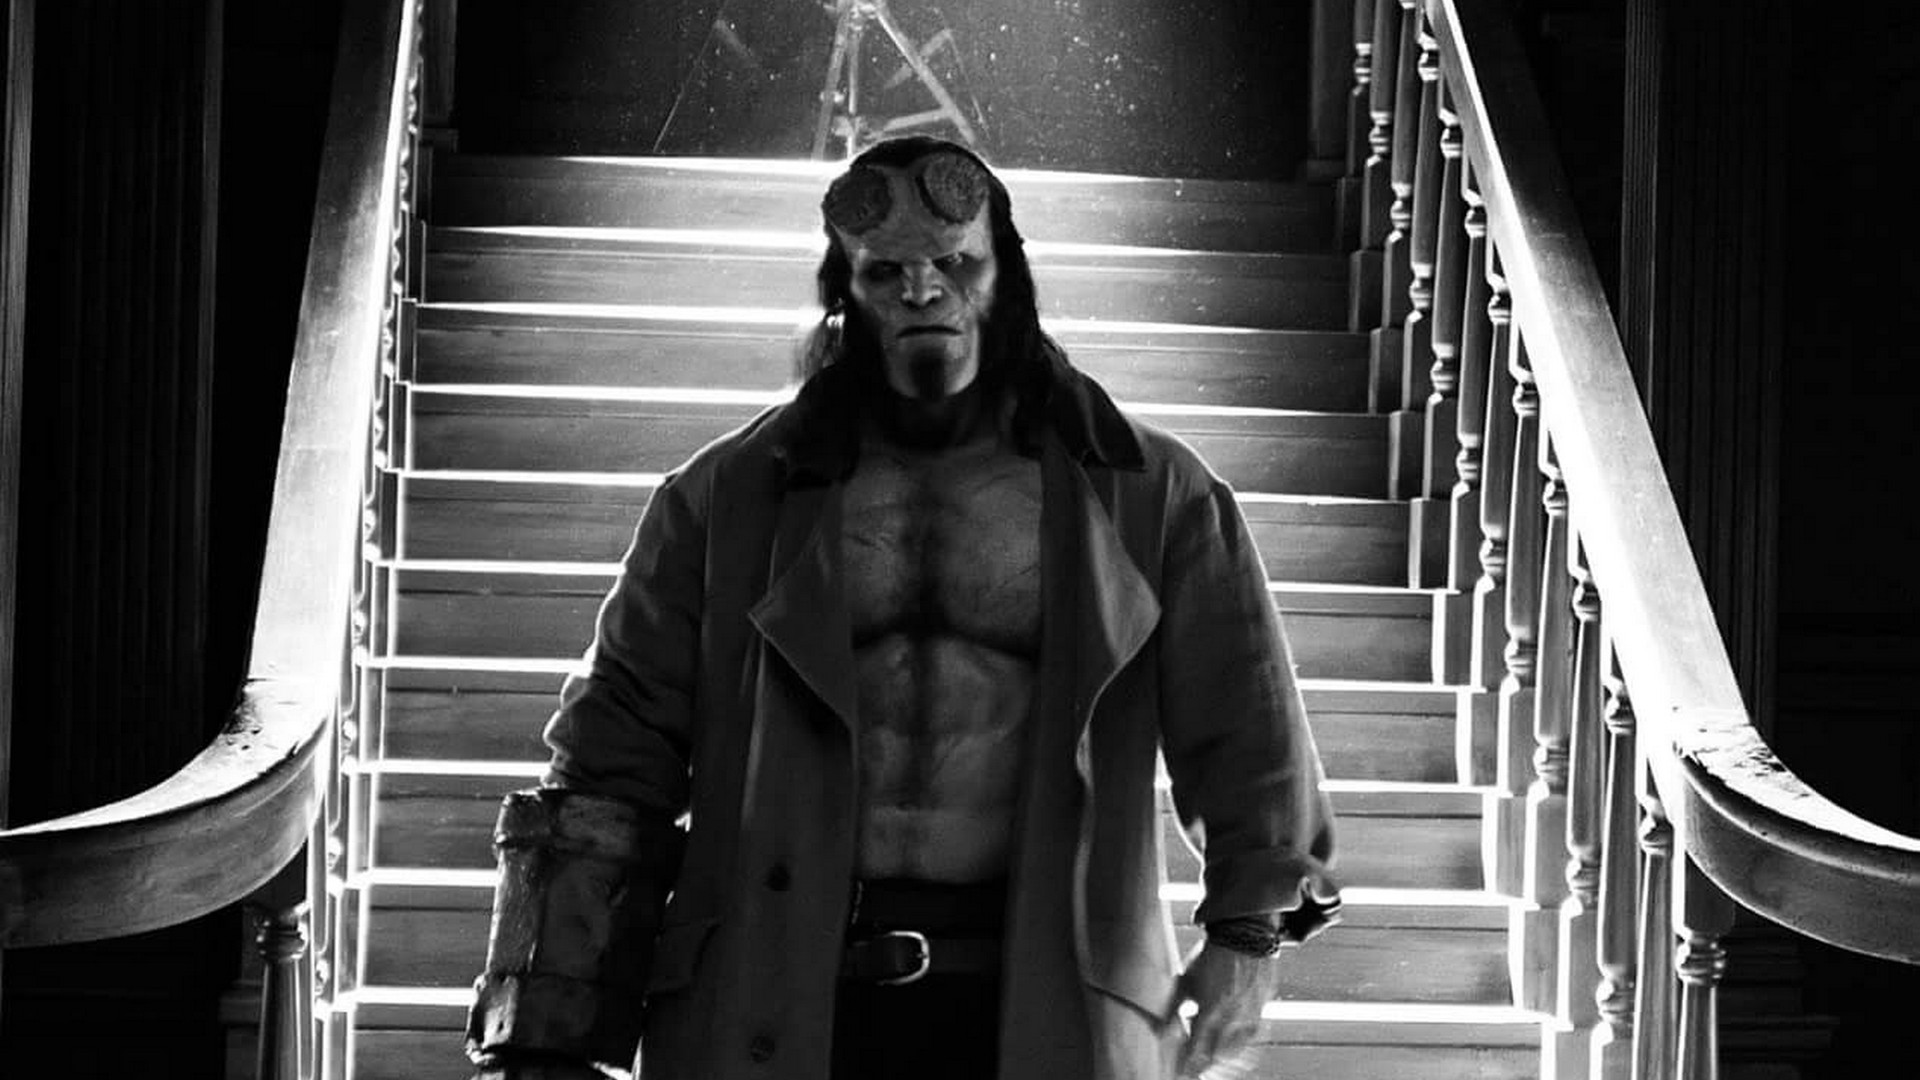 Hellboy Trailer Wallpaper with high-resolution 1920x1080 pixel. You can use this poster wallpaper for your Desktop Computers, Mac Screensavers, Windows Backgrounds, iPhone Wallpapers, Tablet or Android Lock screen and another Mobile device